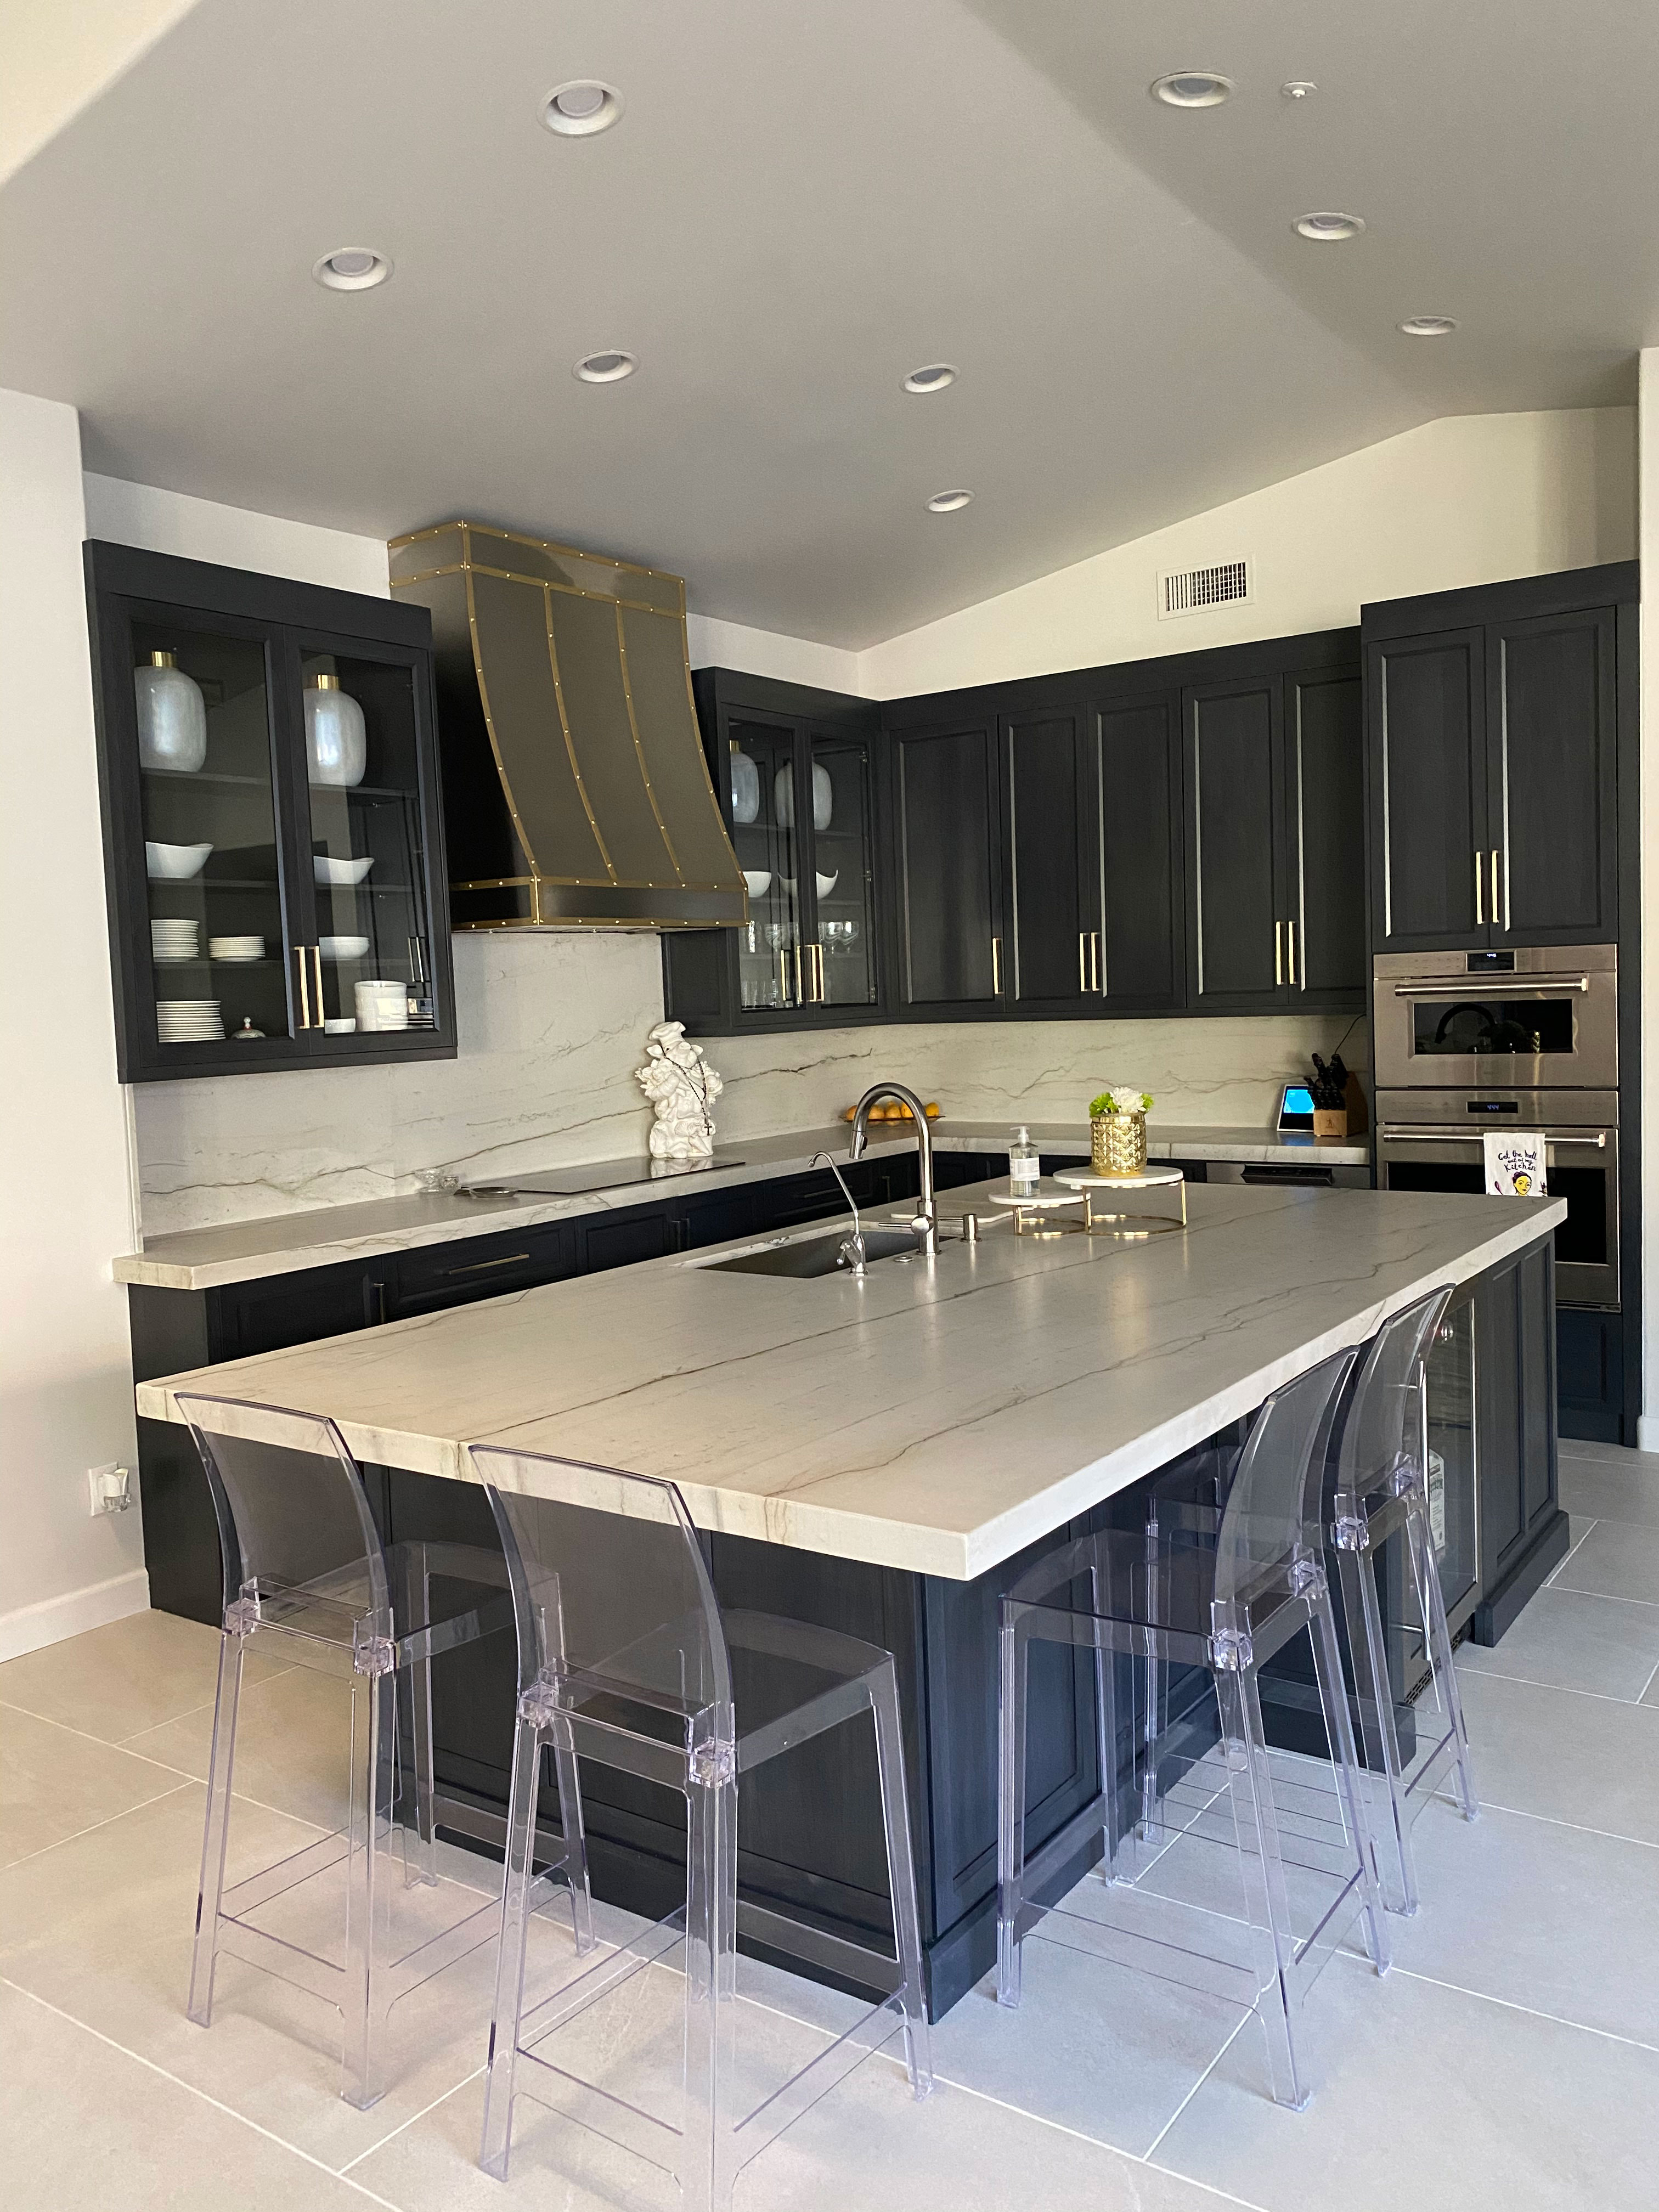 A contemporary kitchen remodeling with sleek black kitchen cabinets and marble kitchen countertops, complemented by a stunning marble backsplash